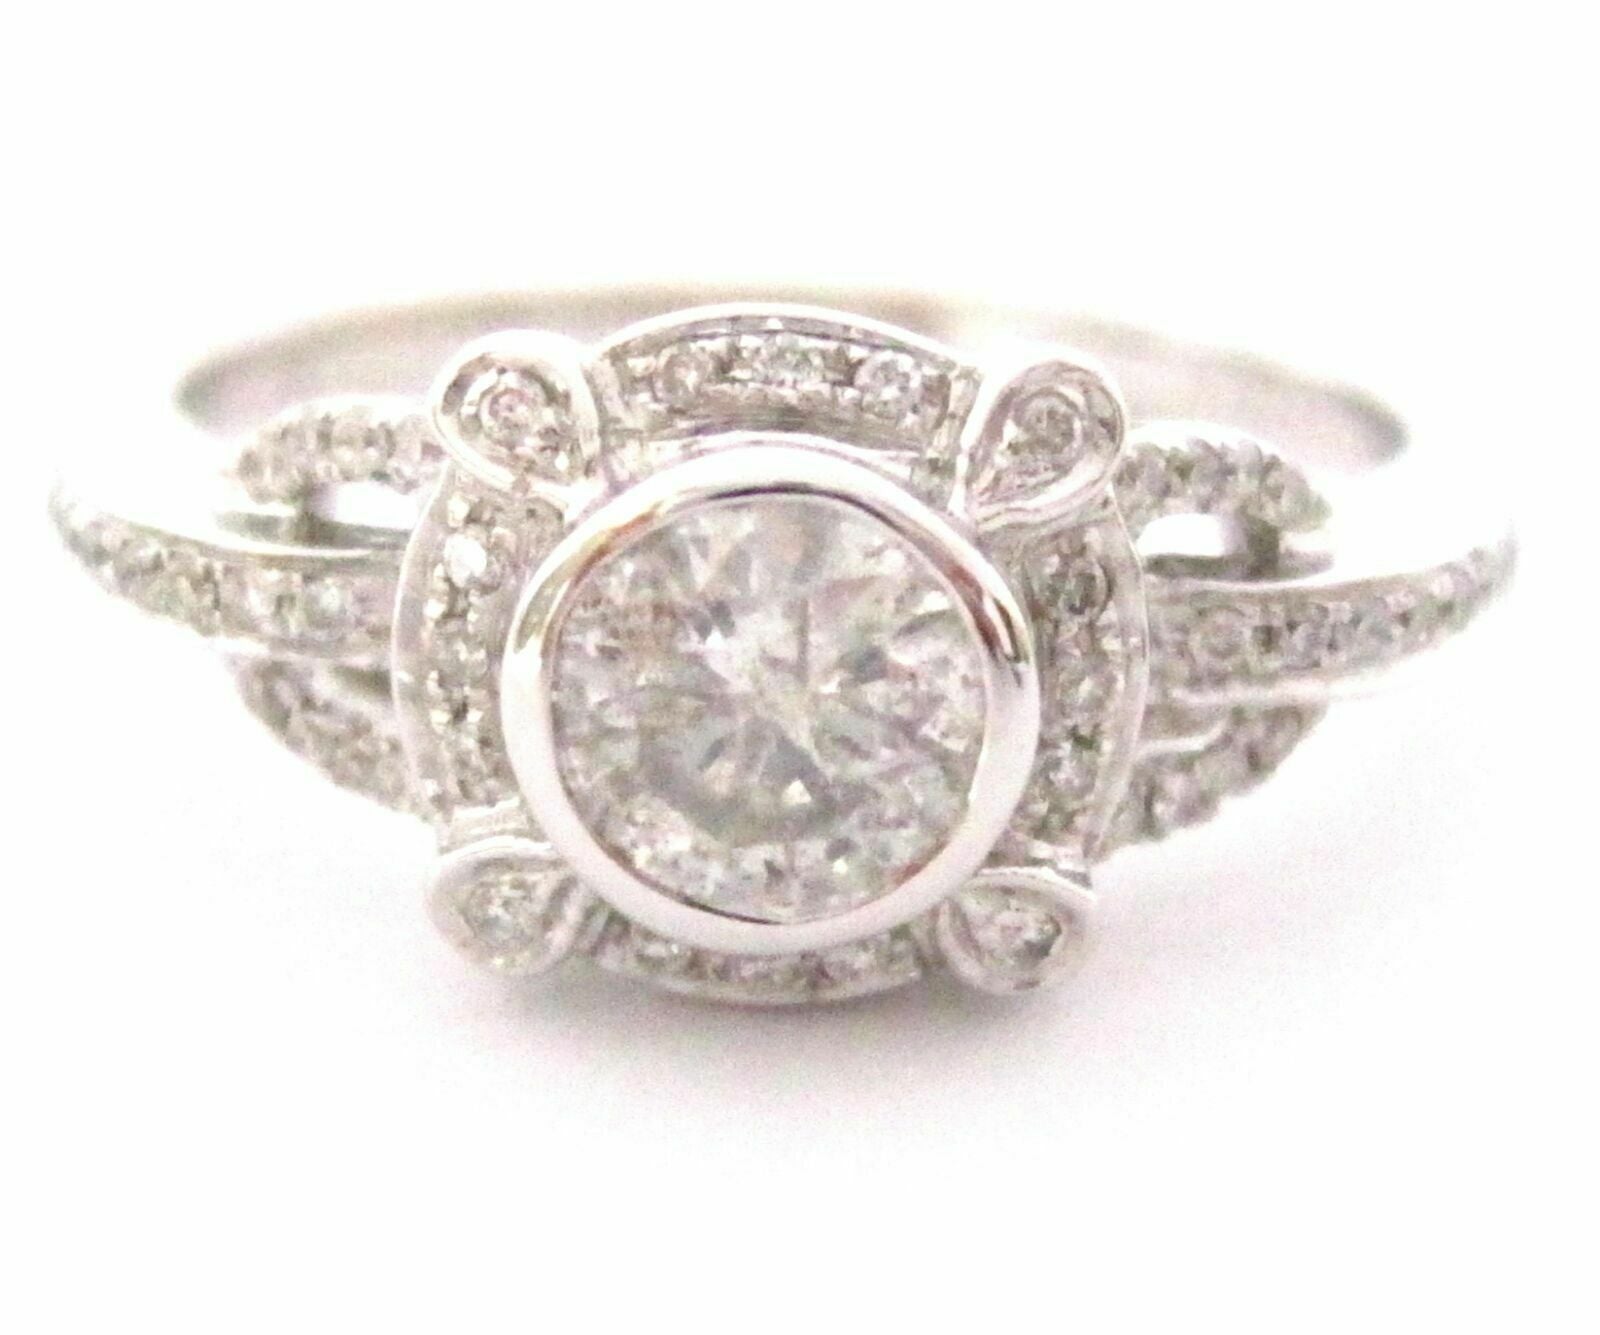 .67 TCW Round Cut Diamond Solitaire Engagement/Anniversary Ring Size 7 G I-1 14k